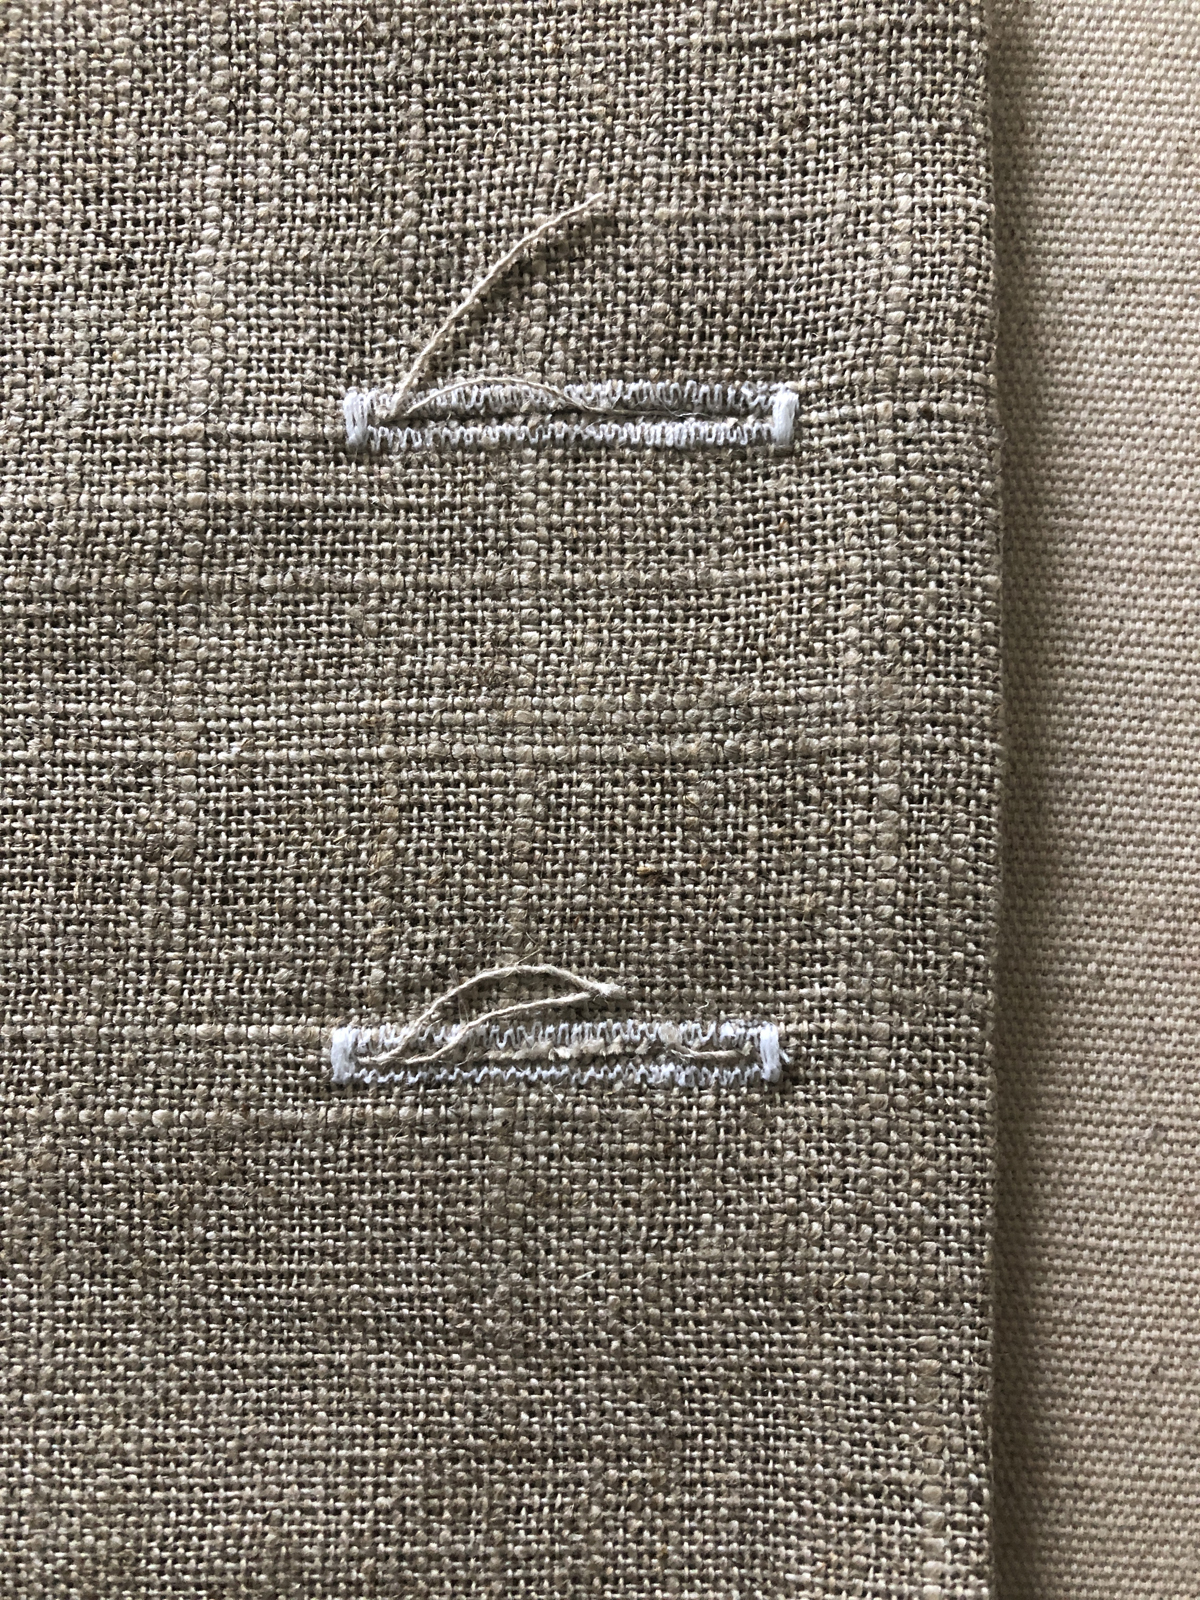 Buttonhole fixes: examples of hairy buttonholes